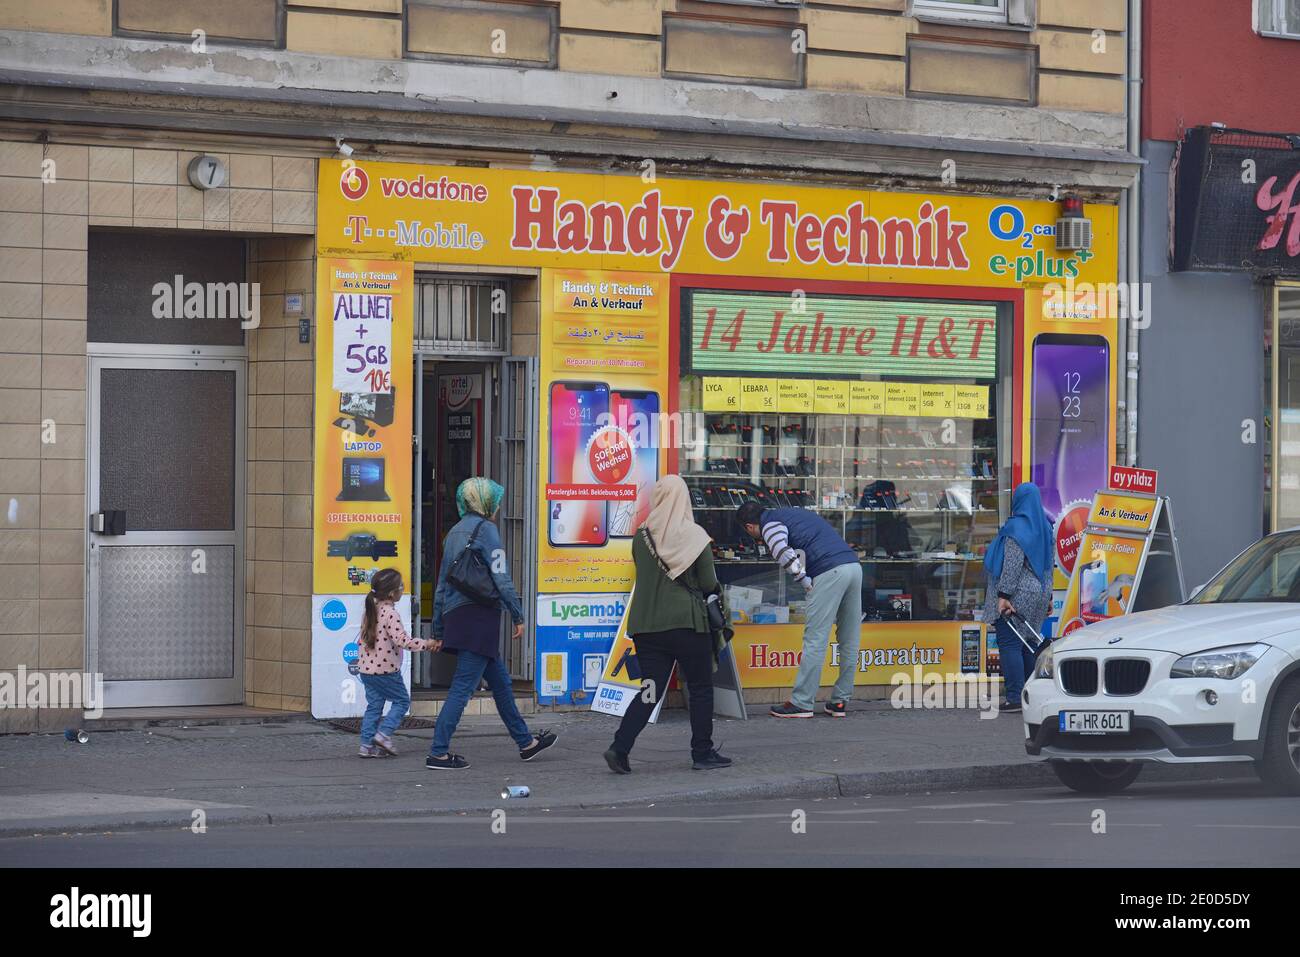 Neukoelln Shopping High Resolution Stock Photography and Images - Alamy